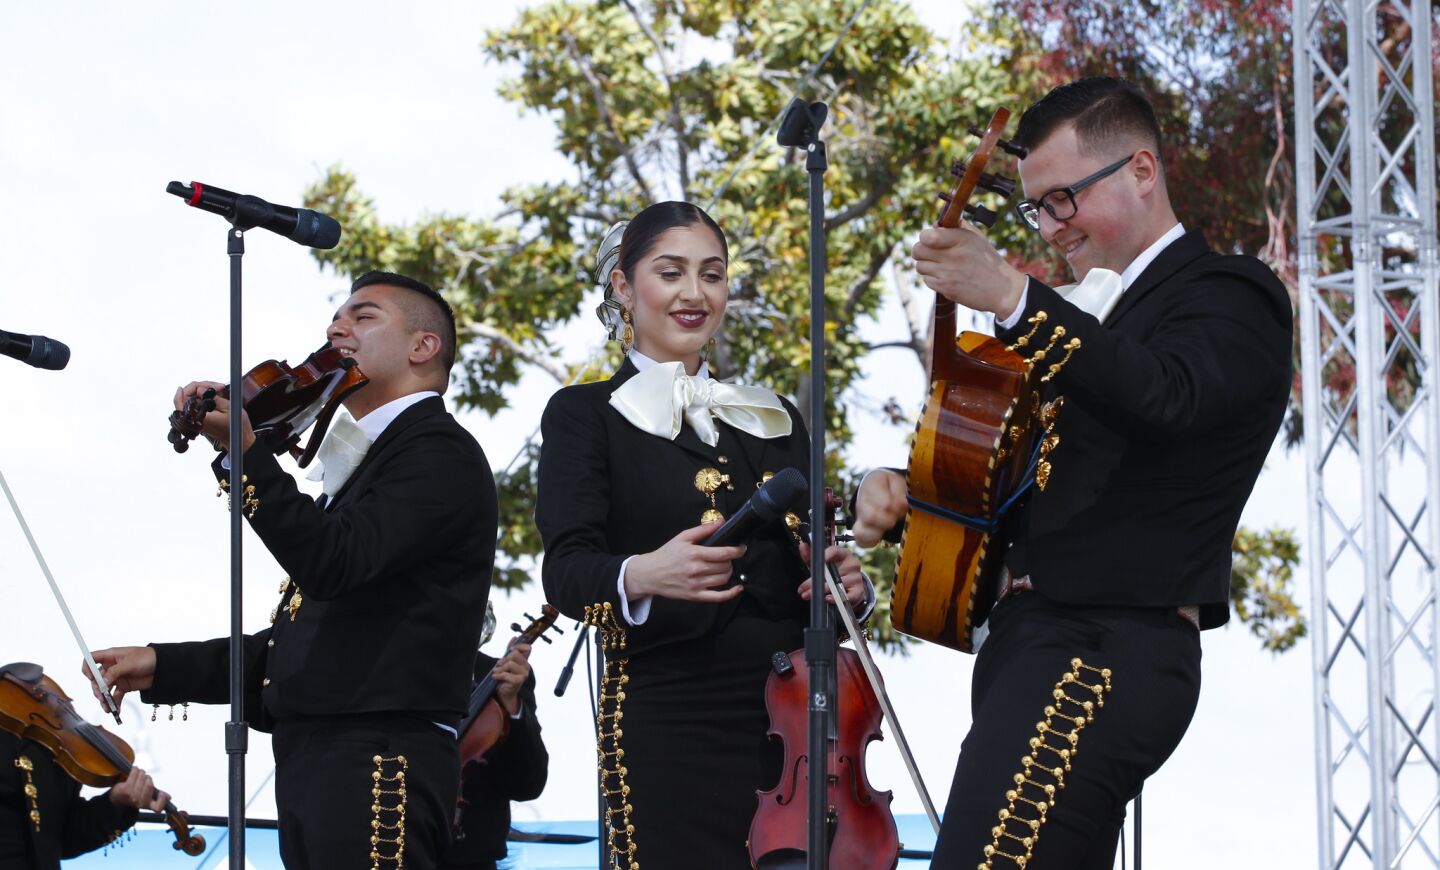 Mariachi Estrellas de Chula Vista played during their Sunday performance performance at the annual International Mariachi Festival in National City.